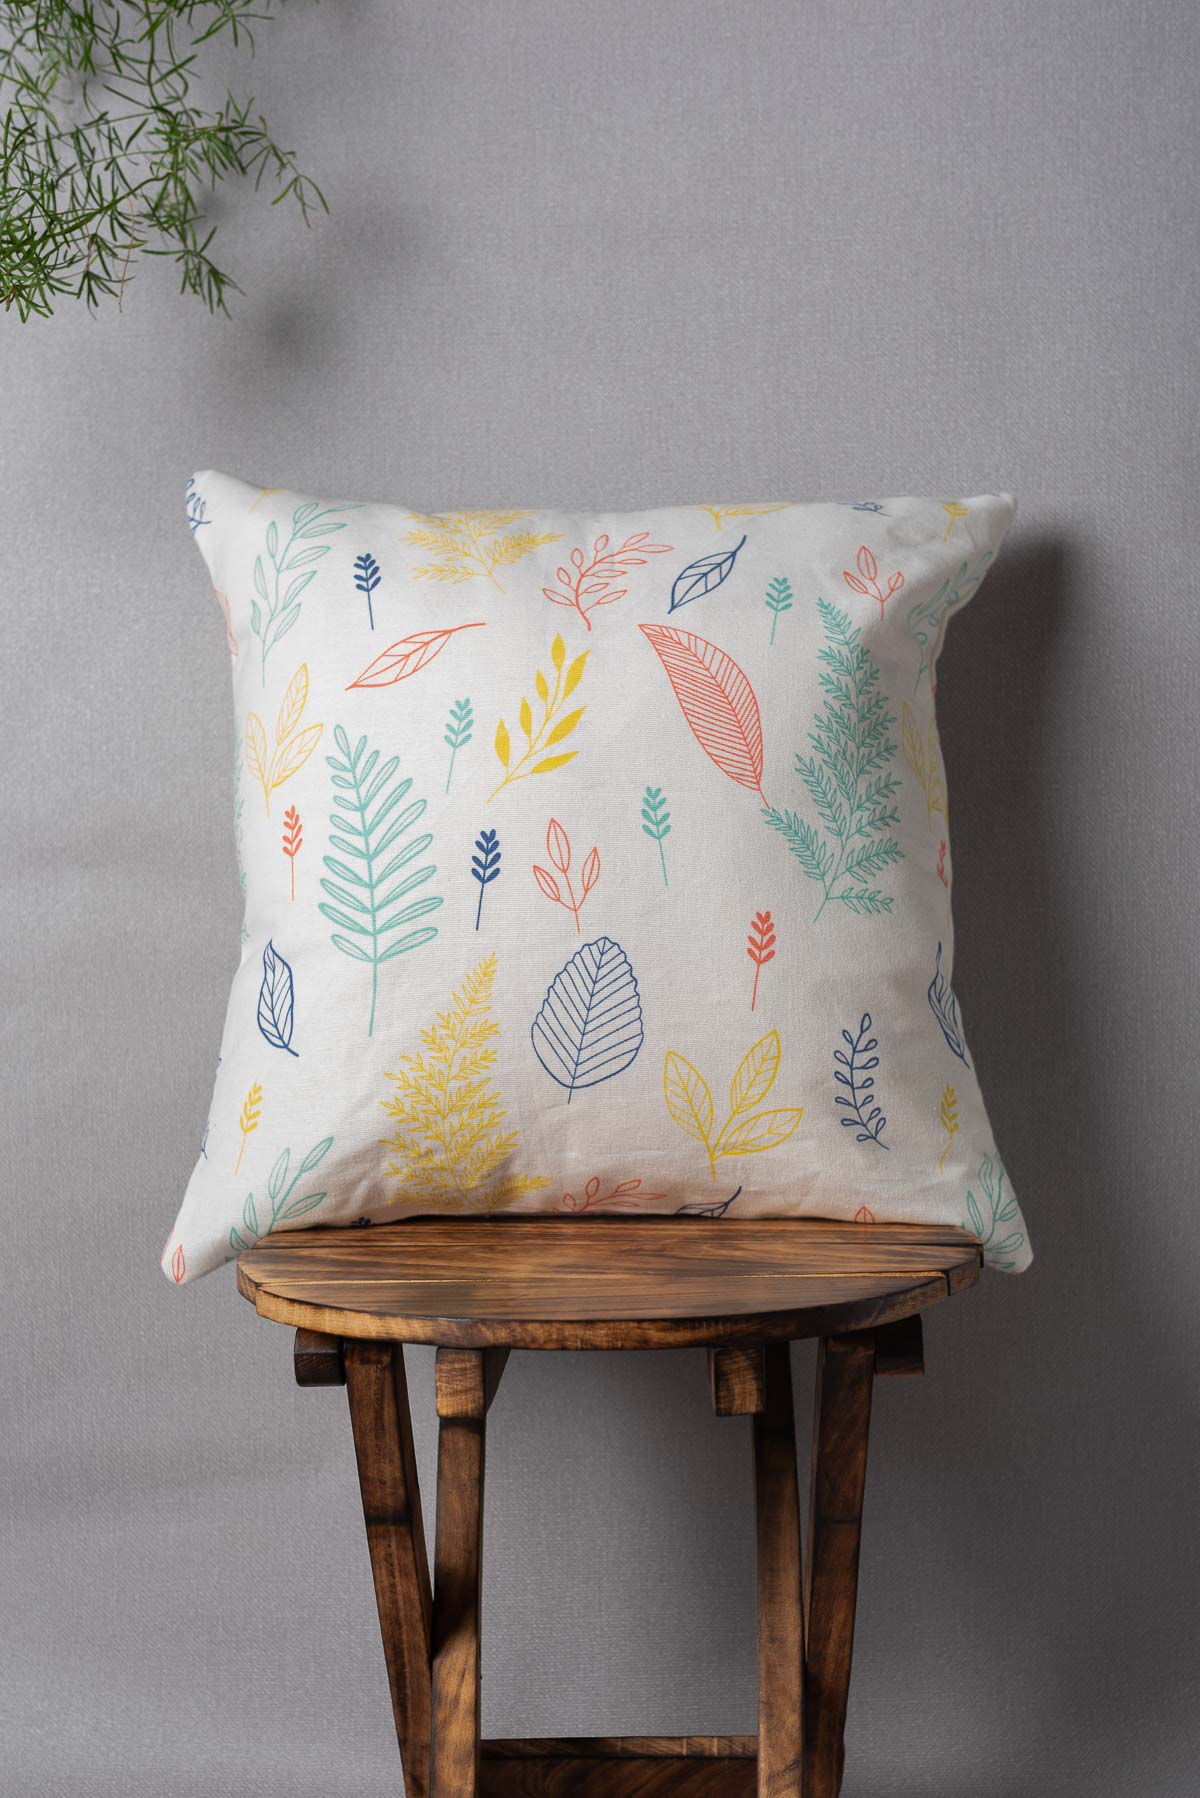 Rustling Leaves Printed Cotton Cushion Cover - Multicolor